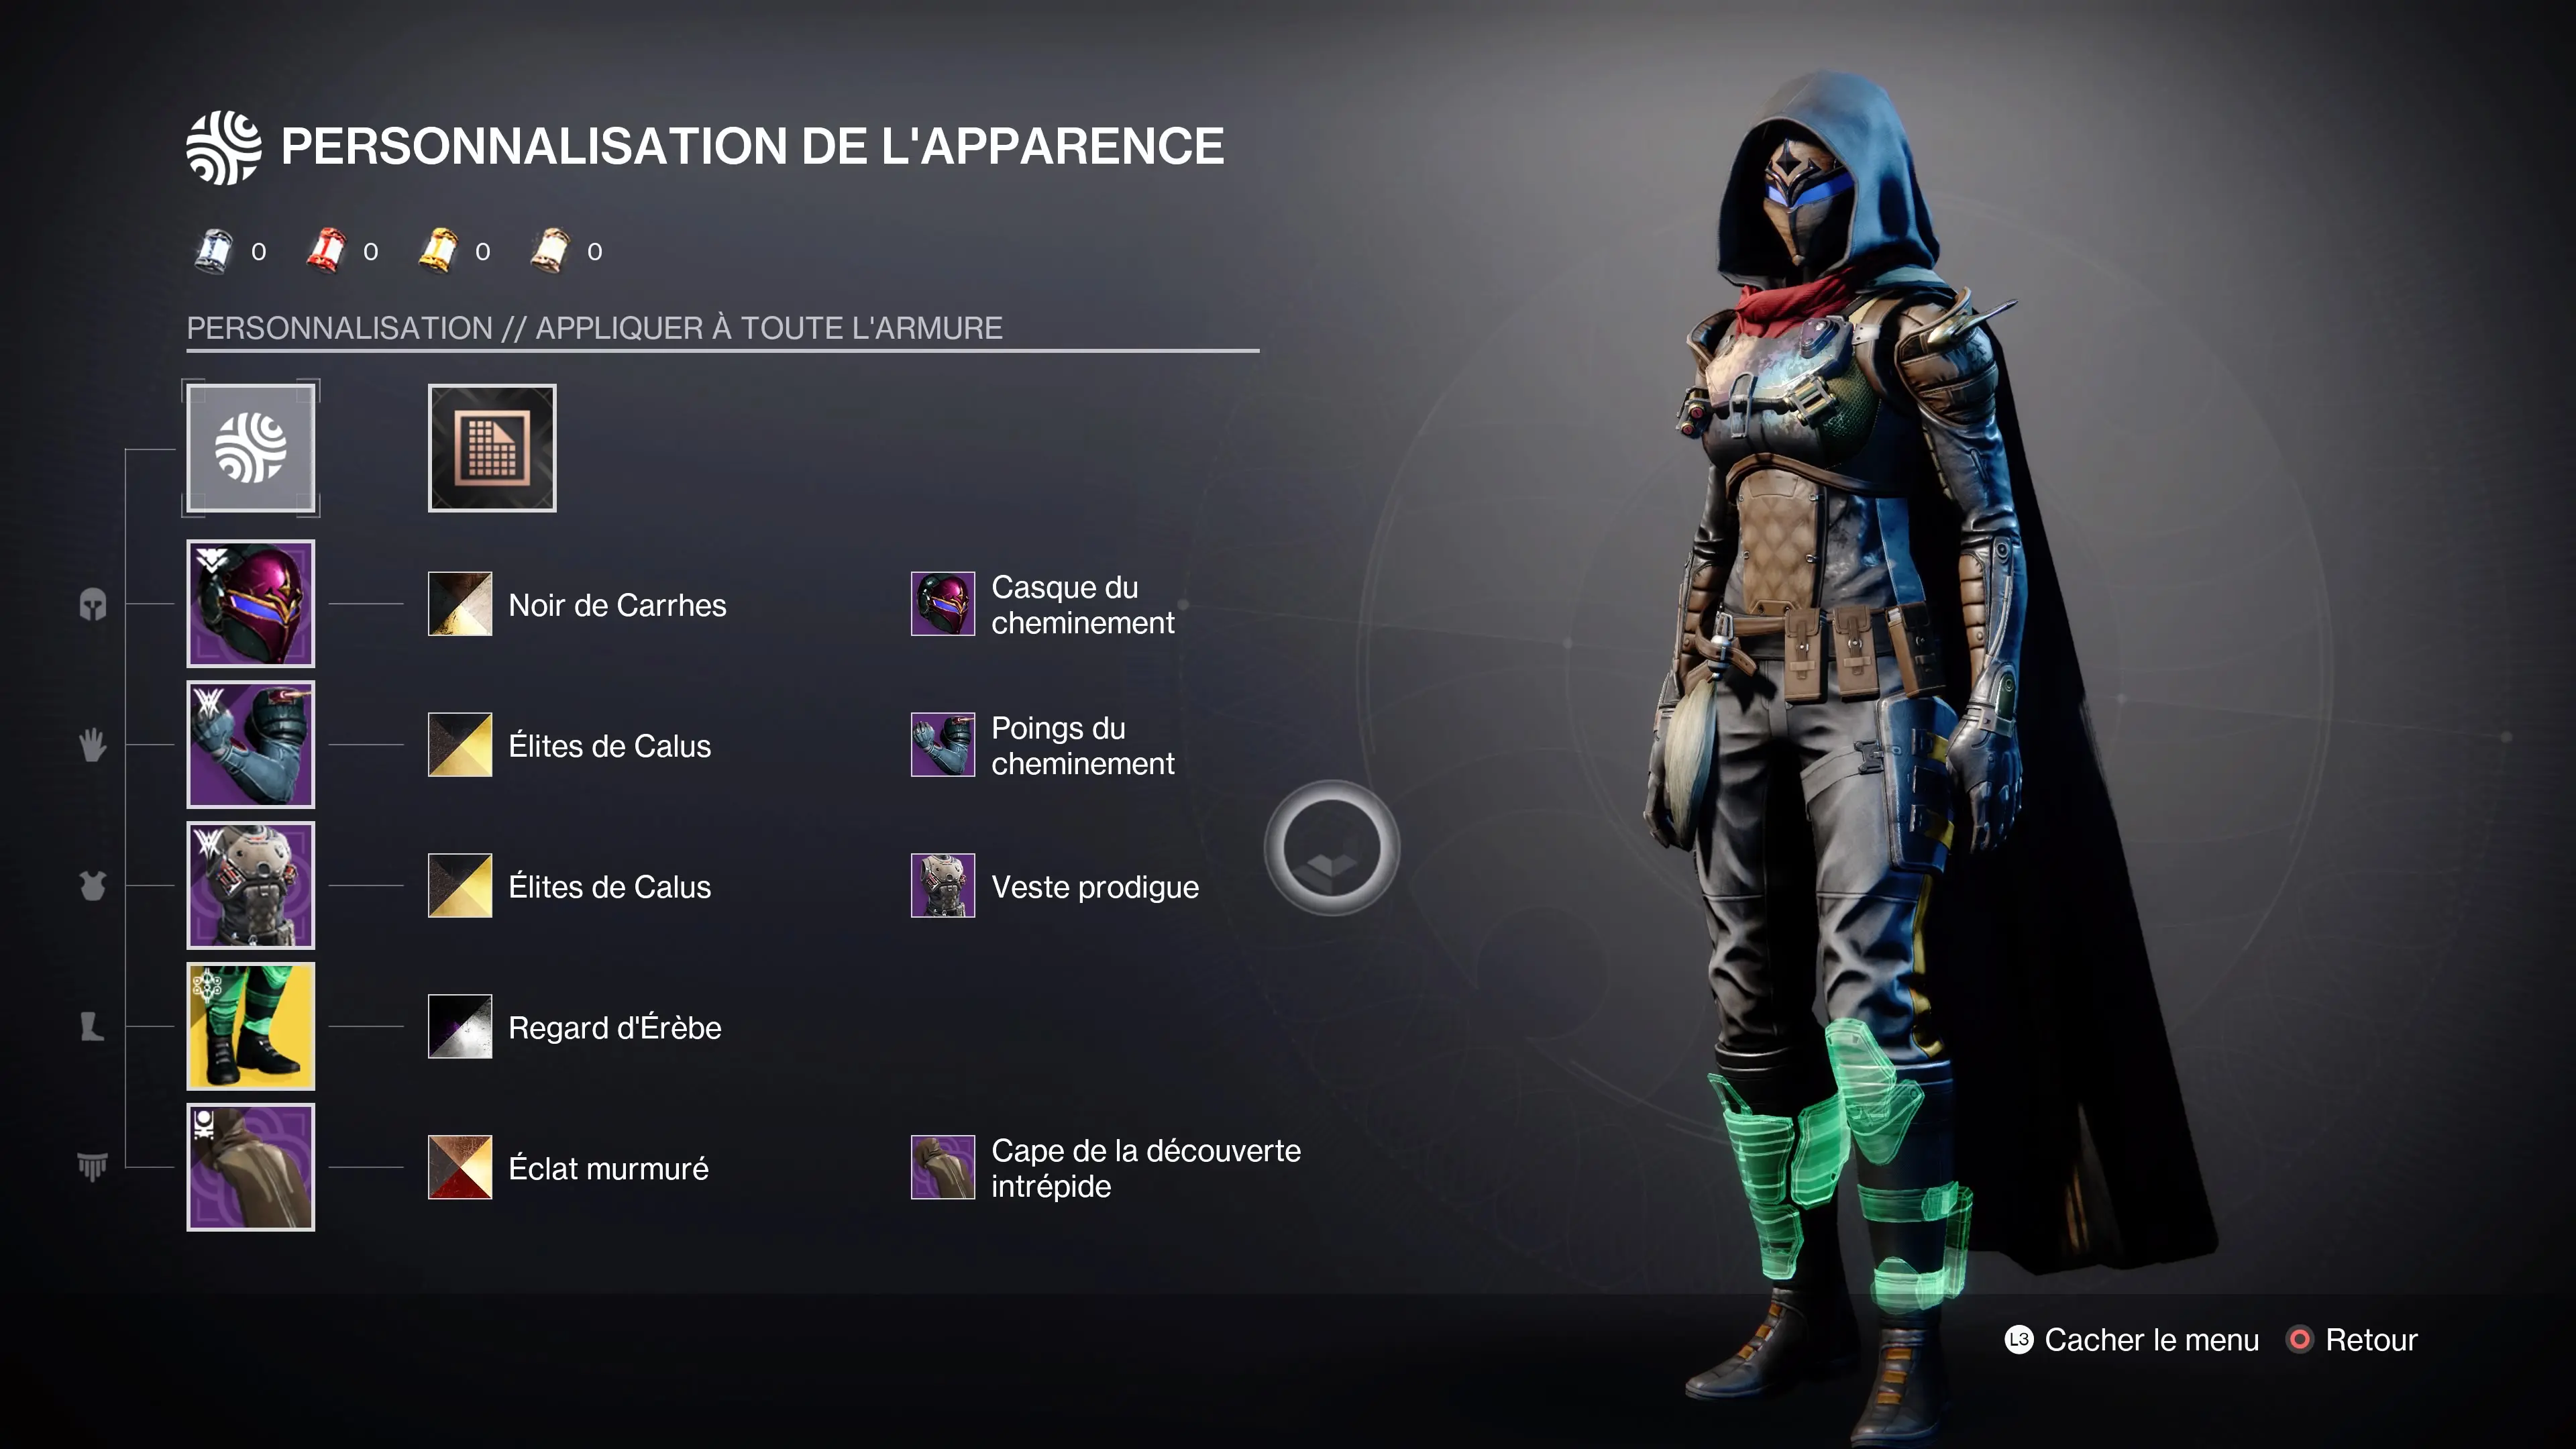 Destiny 2 - Build Chasseur abyssal 3.0 : Saltimbanque invisible